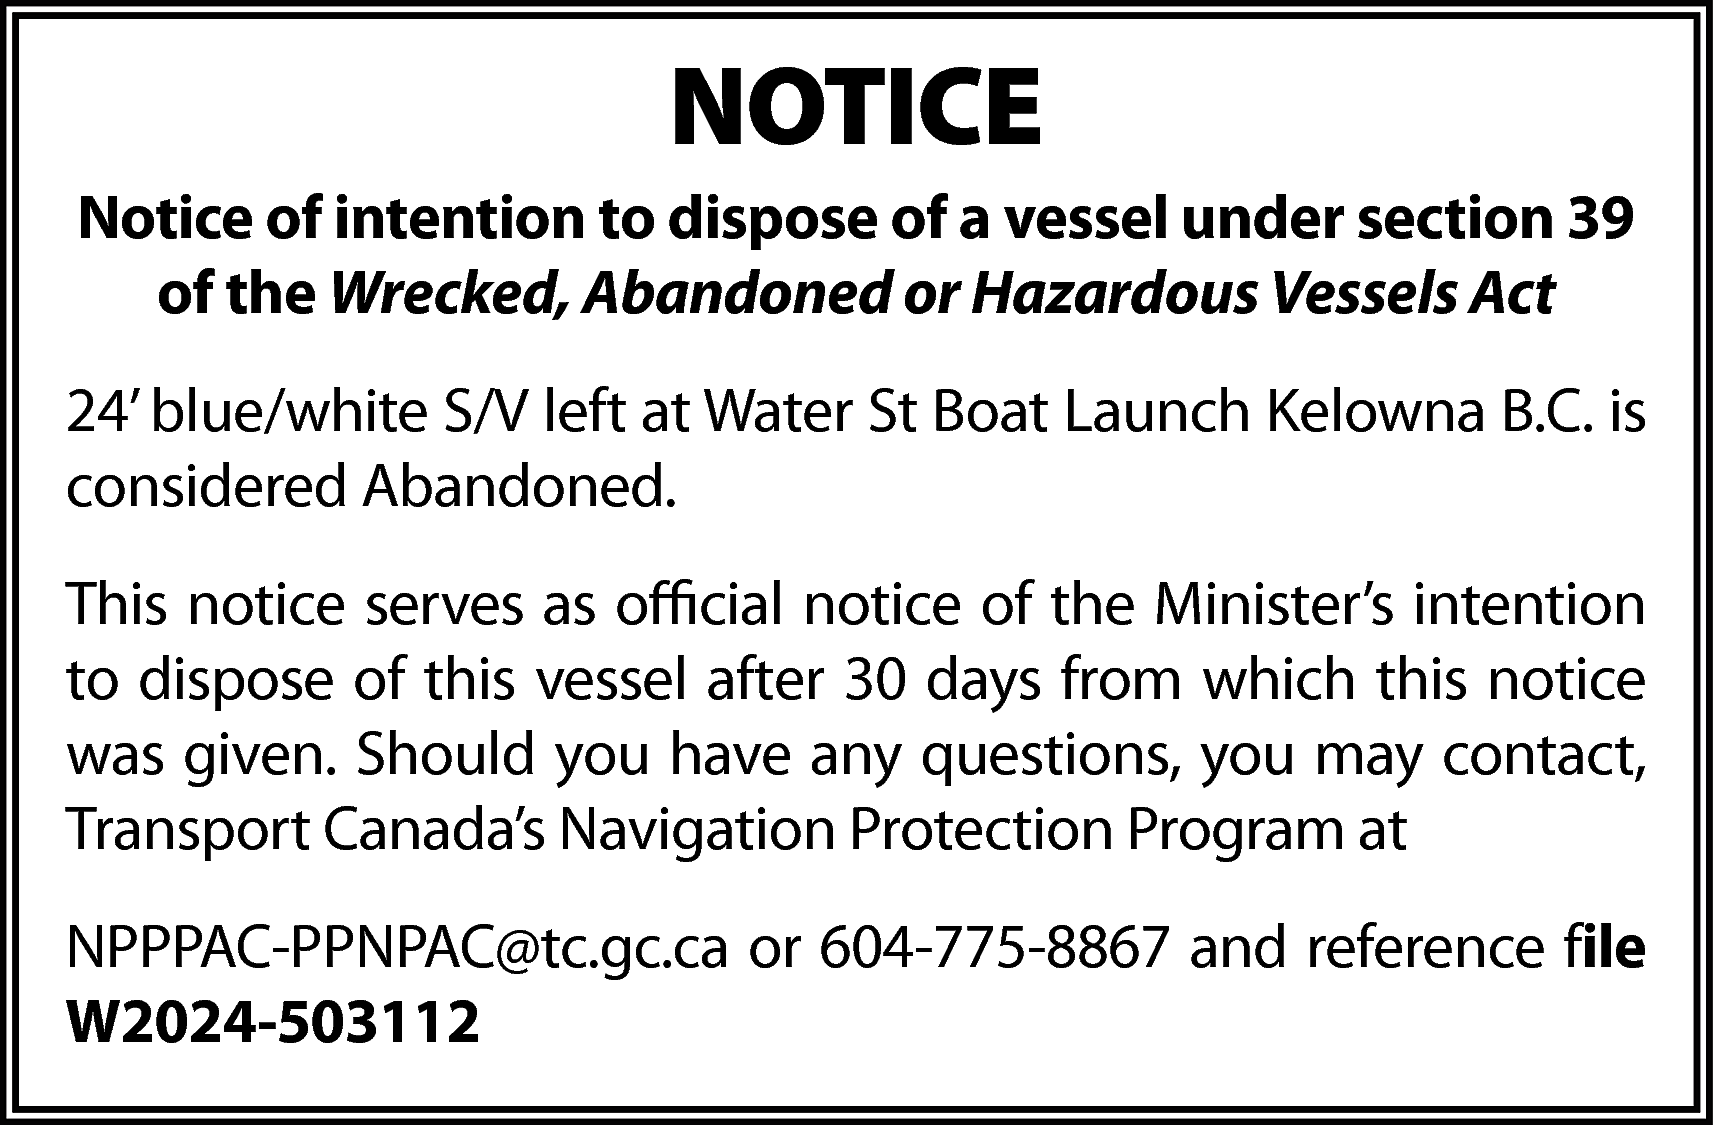 NOTICE <br>Notice of intention to  NOTICE  Notice of intention to dispose of a vessel under section 39  of the Wrecked, Abandoned or Hazardous Vessels Act  24’ blue/white S/V left at Water St Boat Launch Kelowna B.C. is  considered Abandoned.  This notice serves as official notice of the Minister’s intention  to dispose of this vessel after 30 days from which this notice  was given. Should you have any questions, you may contact,  Transport Canada’s Navigation Protection Program at  NPPPAC-PPNPAC@tc.gc.ca or 604-775-8867 and reference file  W2024-503112    